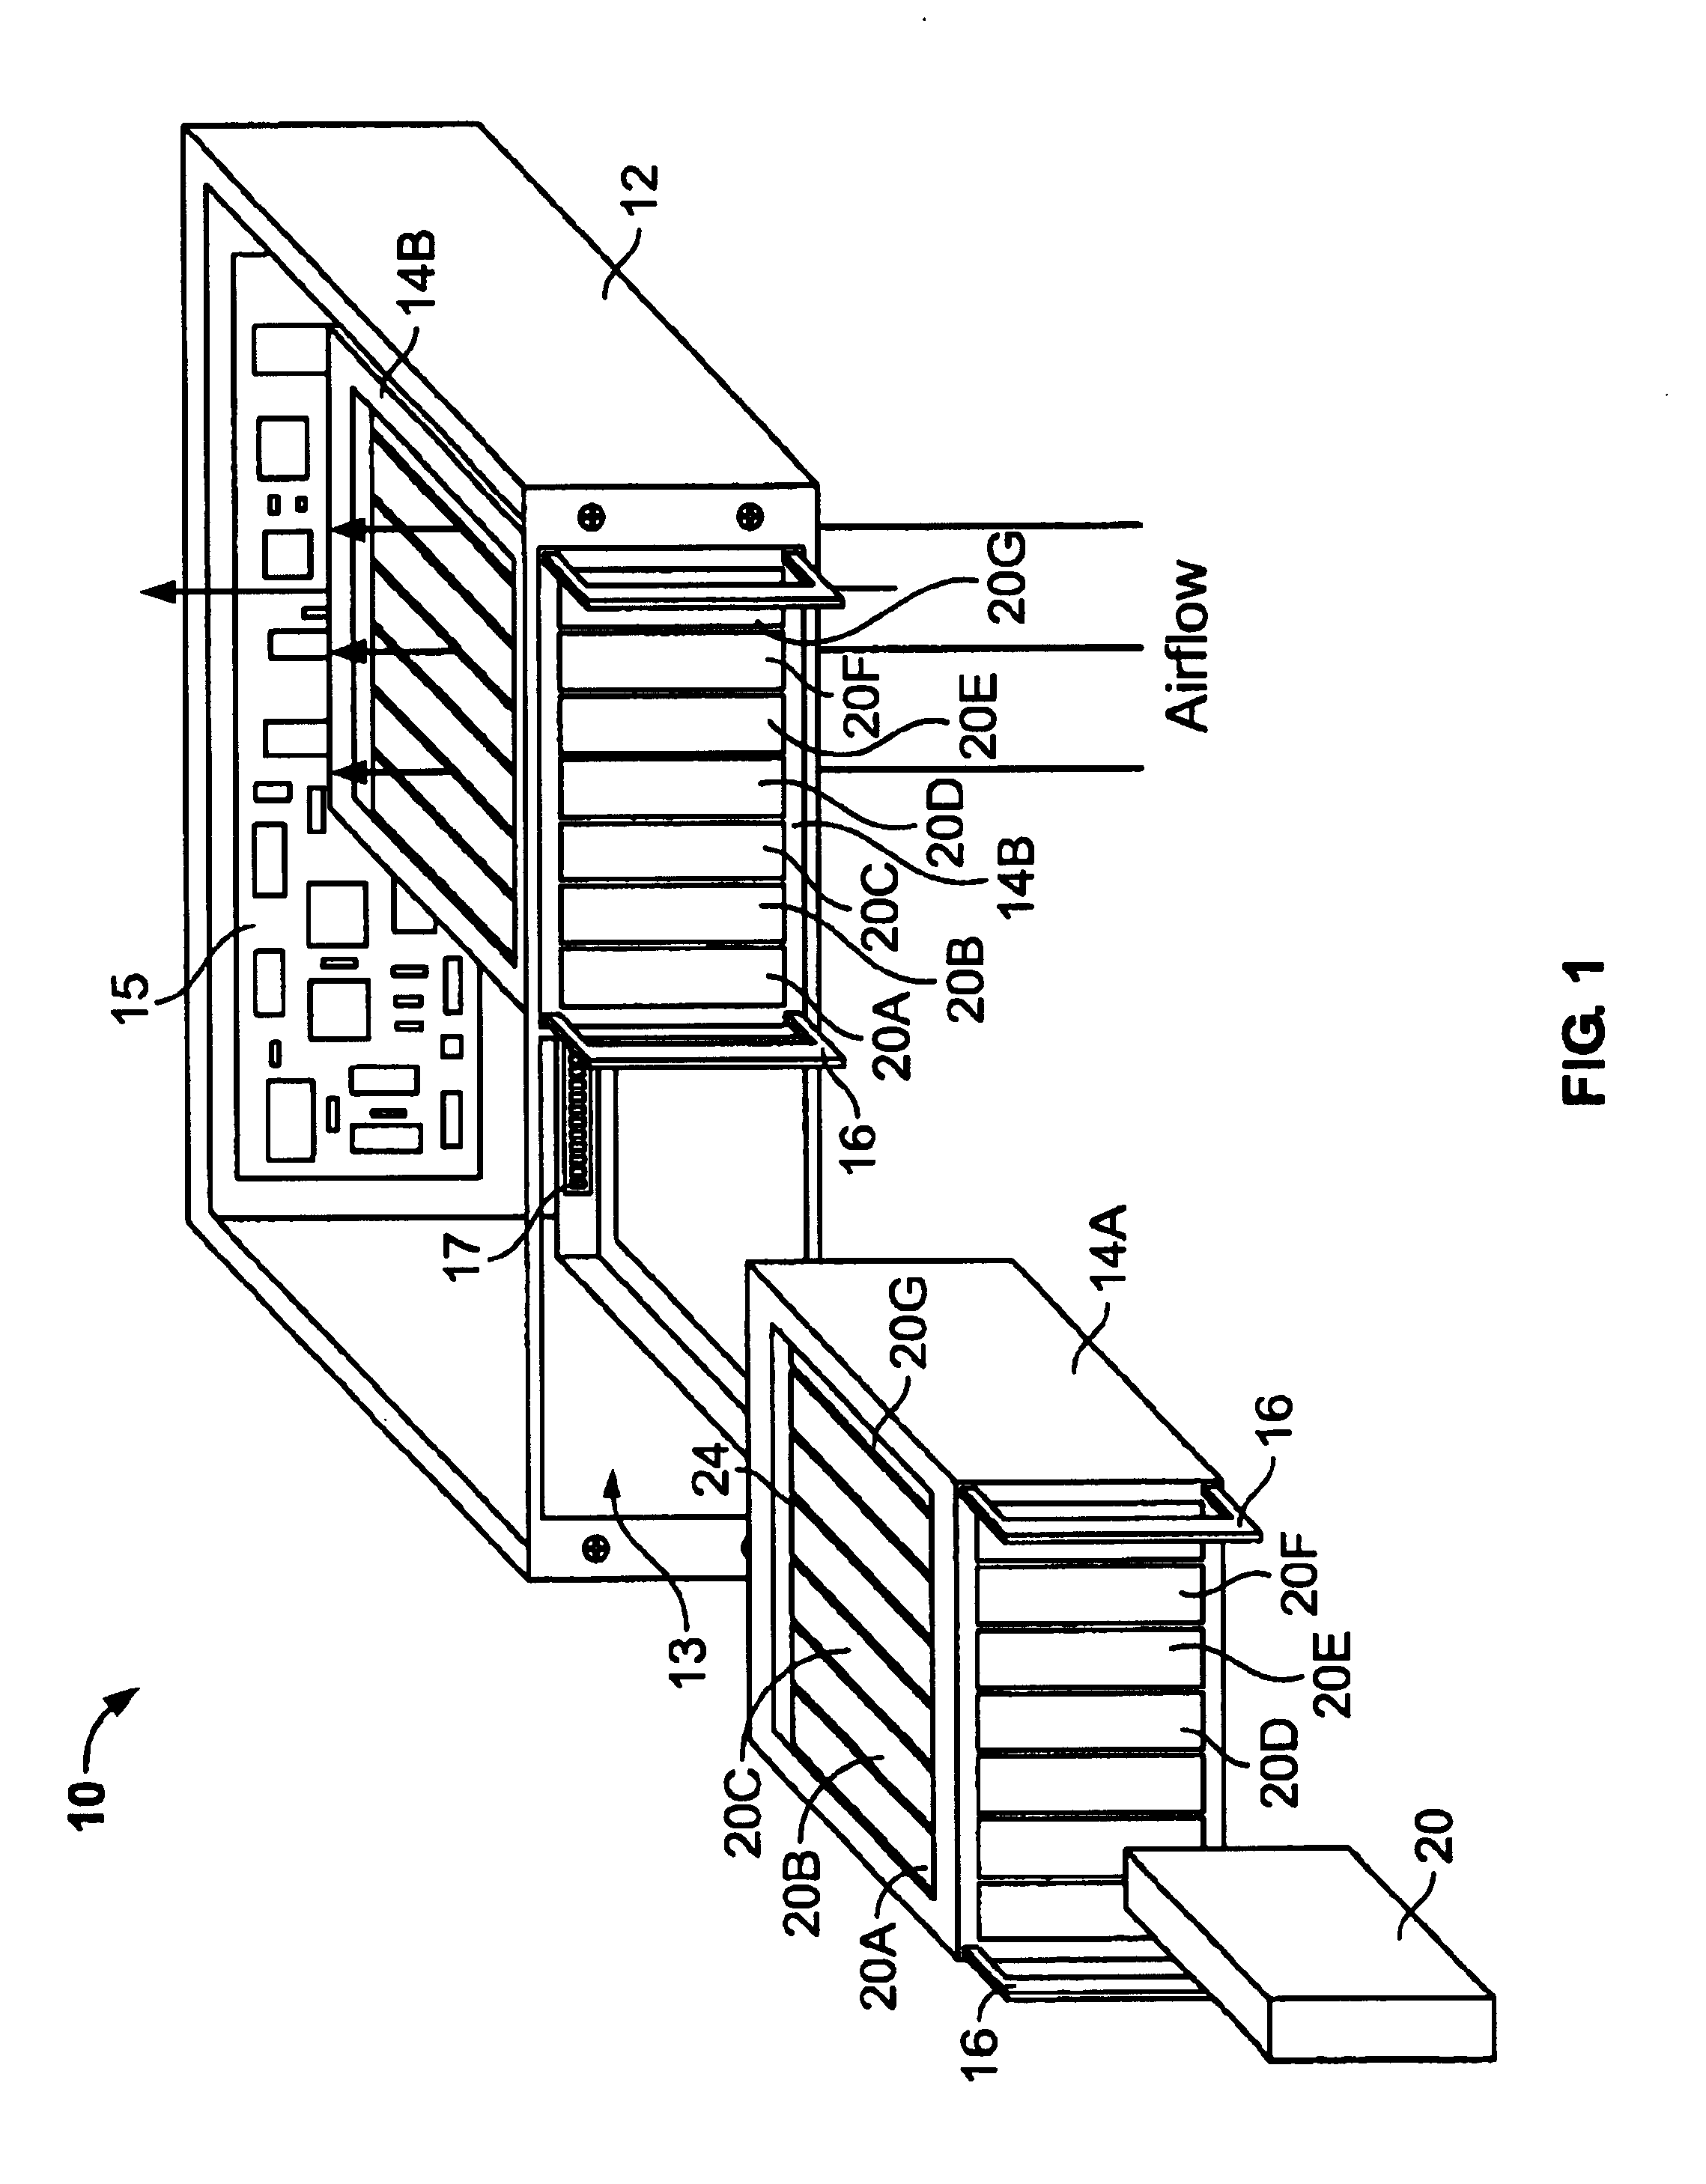 Removable disk storage array emulating tape library having backup and archive capability